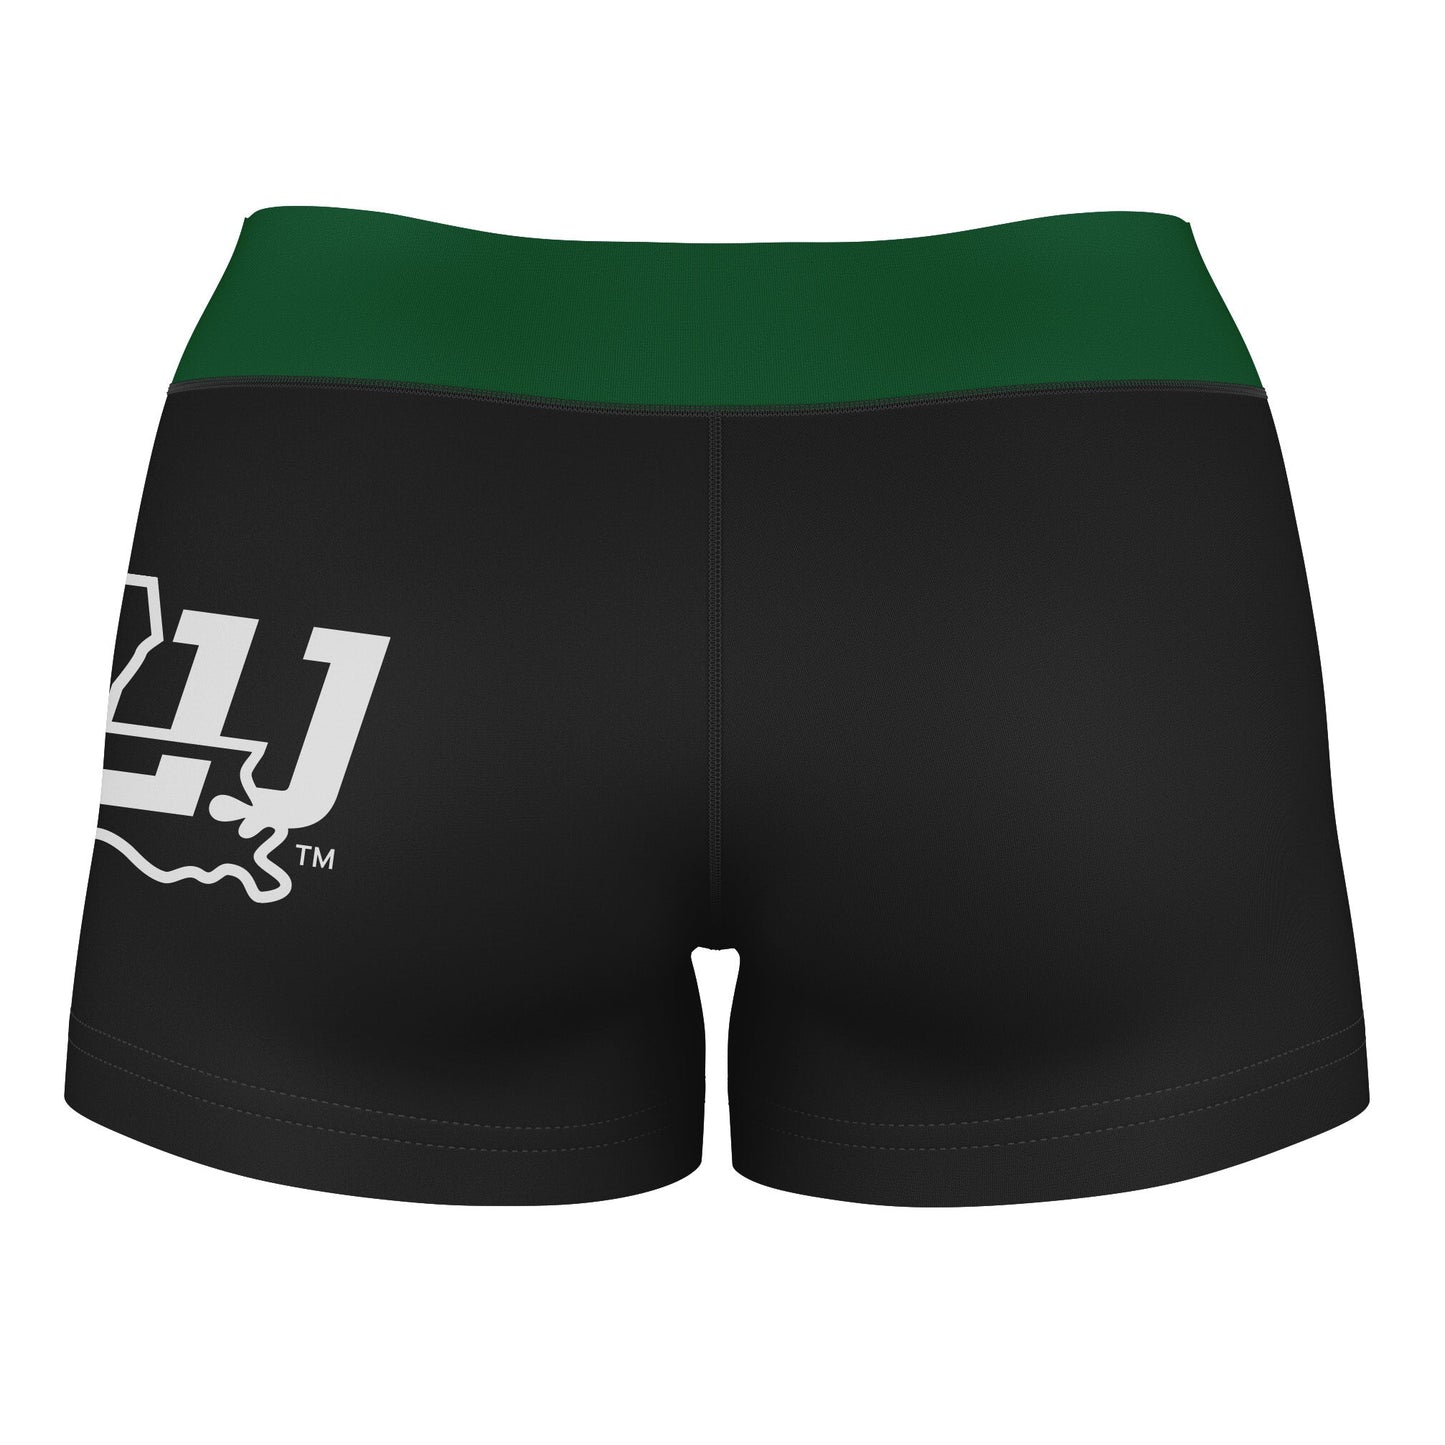 Southeastern Lions Logo on Thigh and Waistband Black & Green Womens Yoga Booty Workout Shorts by Vive La Fete